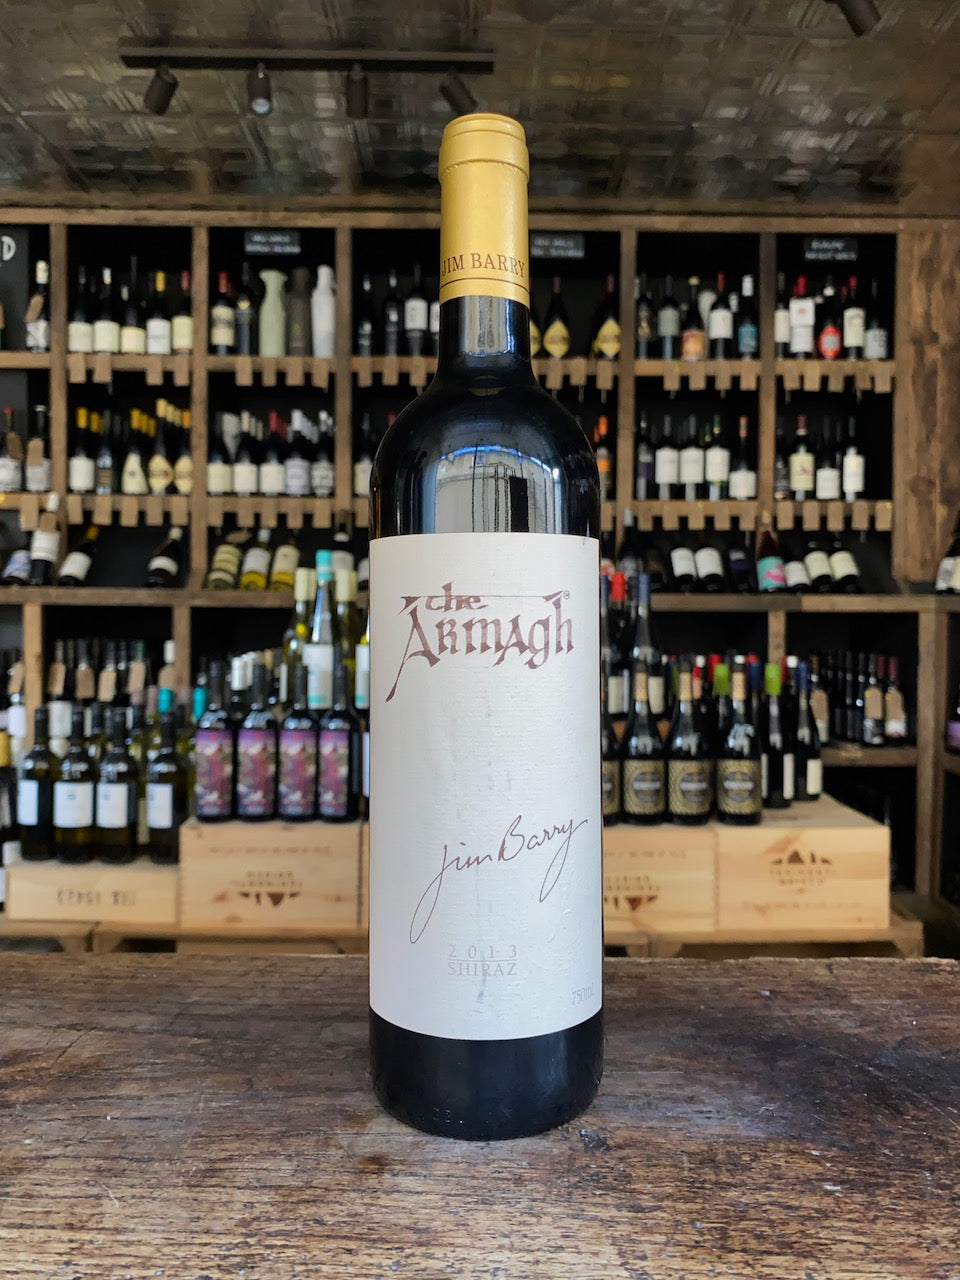 Armagh Shiraz Jim Barry 2013 Clare Valley